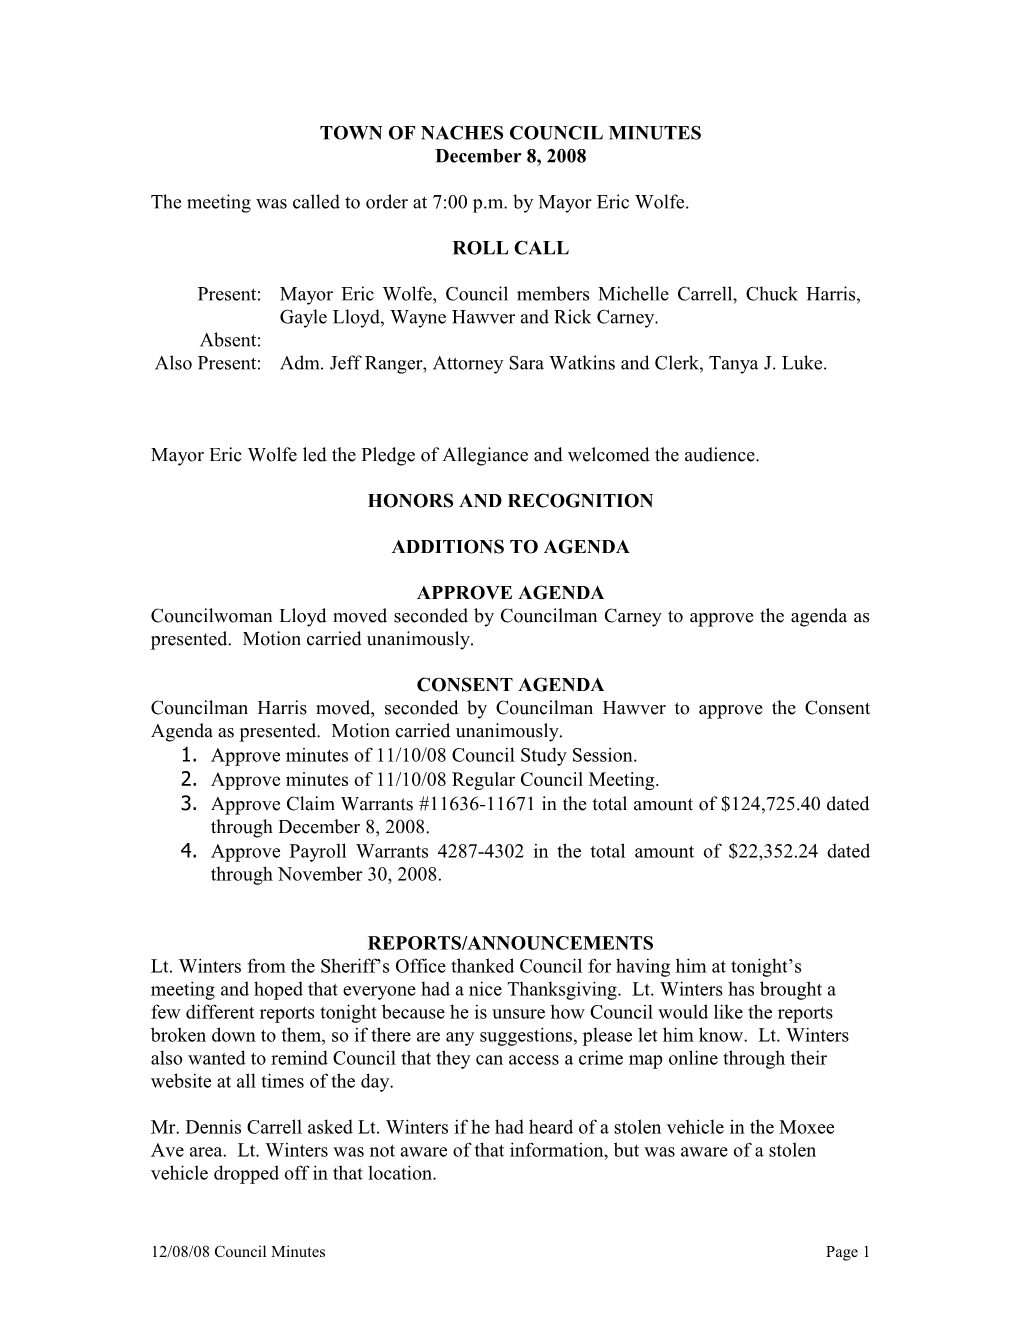 Town of Naches Council Minutes s1